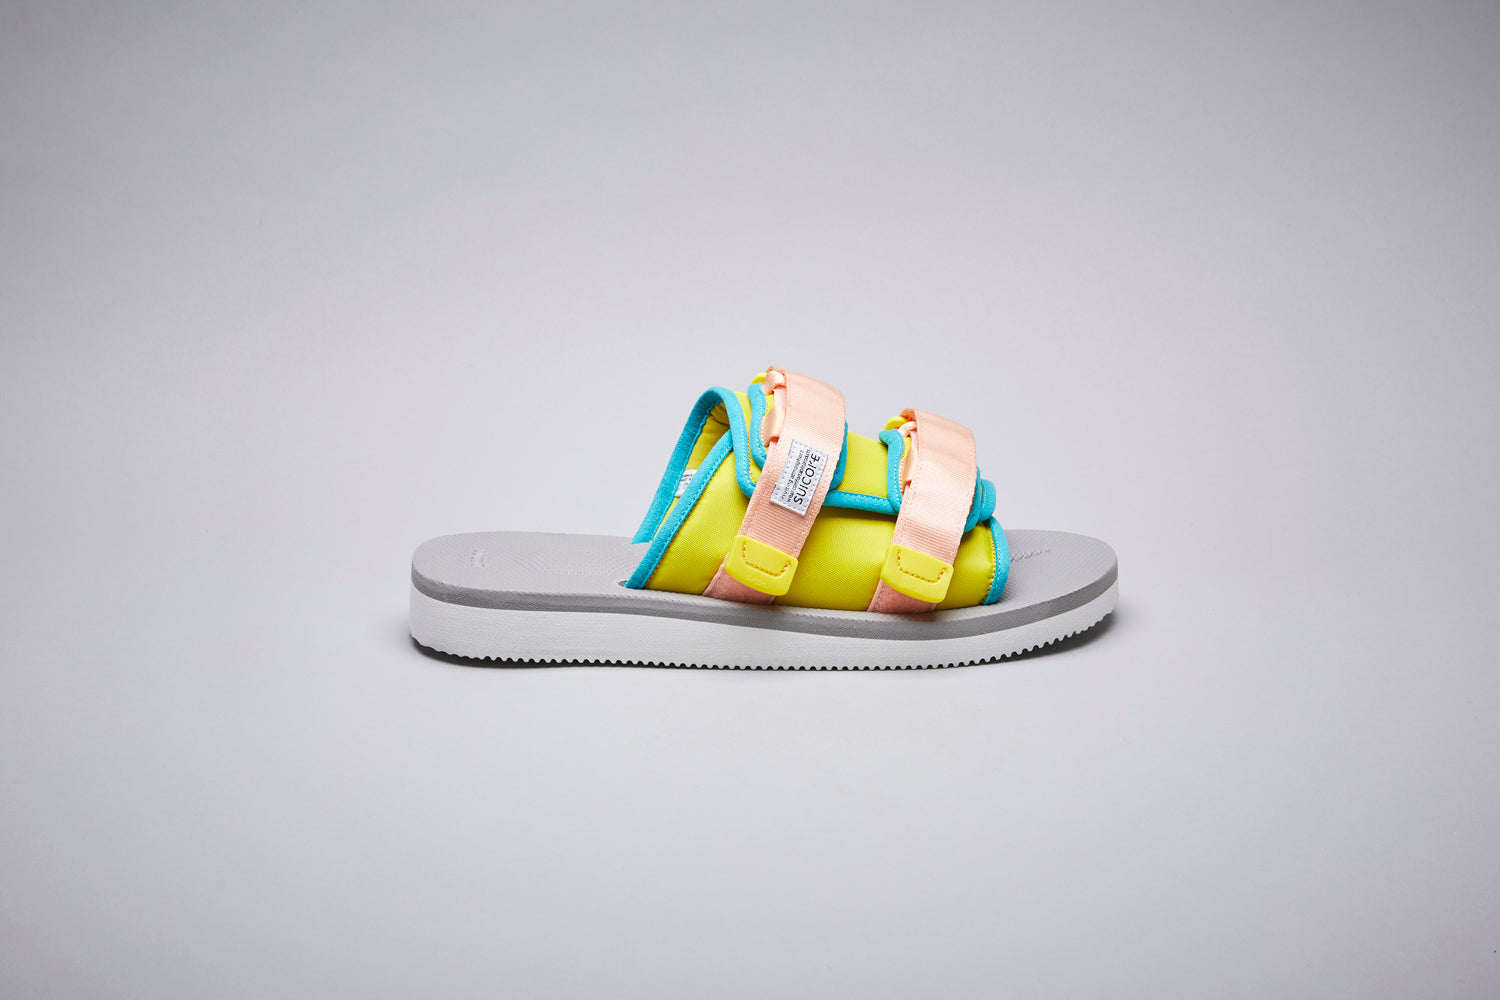 SUICOKE-Sandals-MOTO-CAB - Yellow/Gray-OG-056CABOfficial Webstore Spring 2021